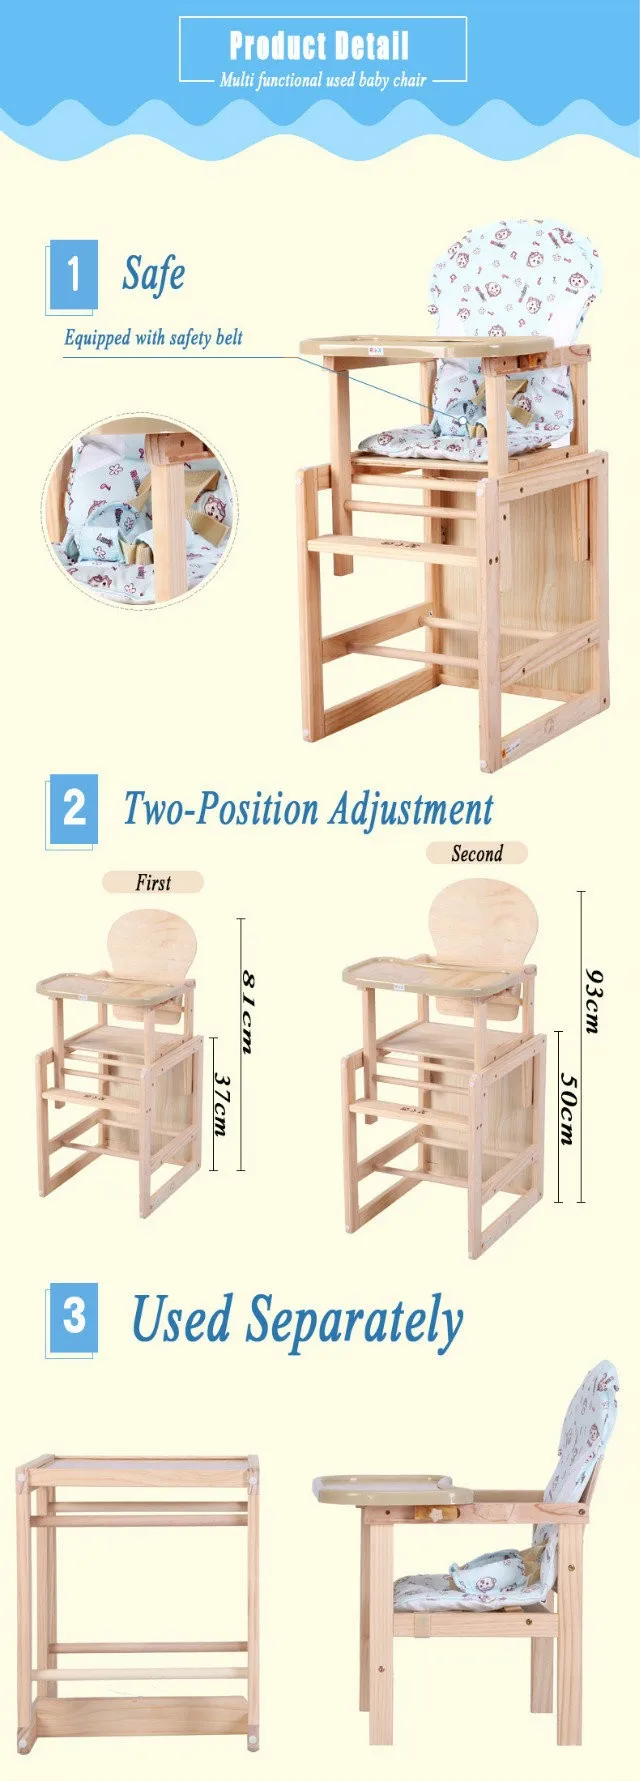 2 in 1 high chair and table